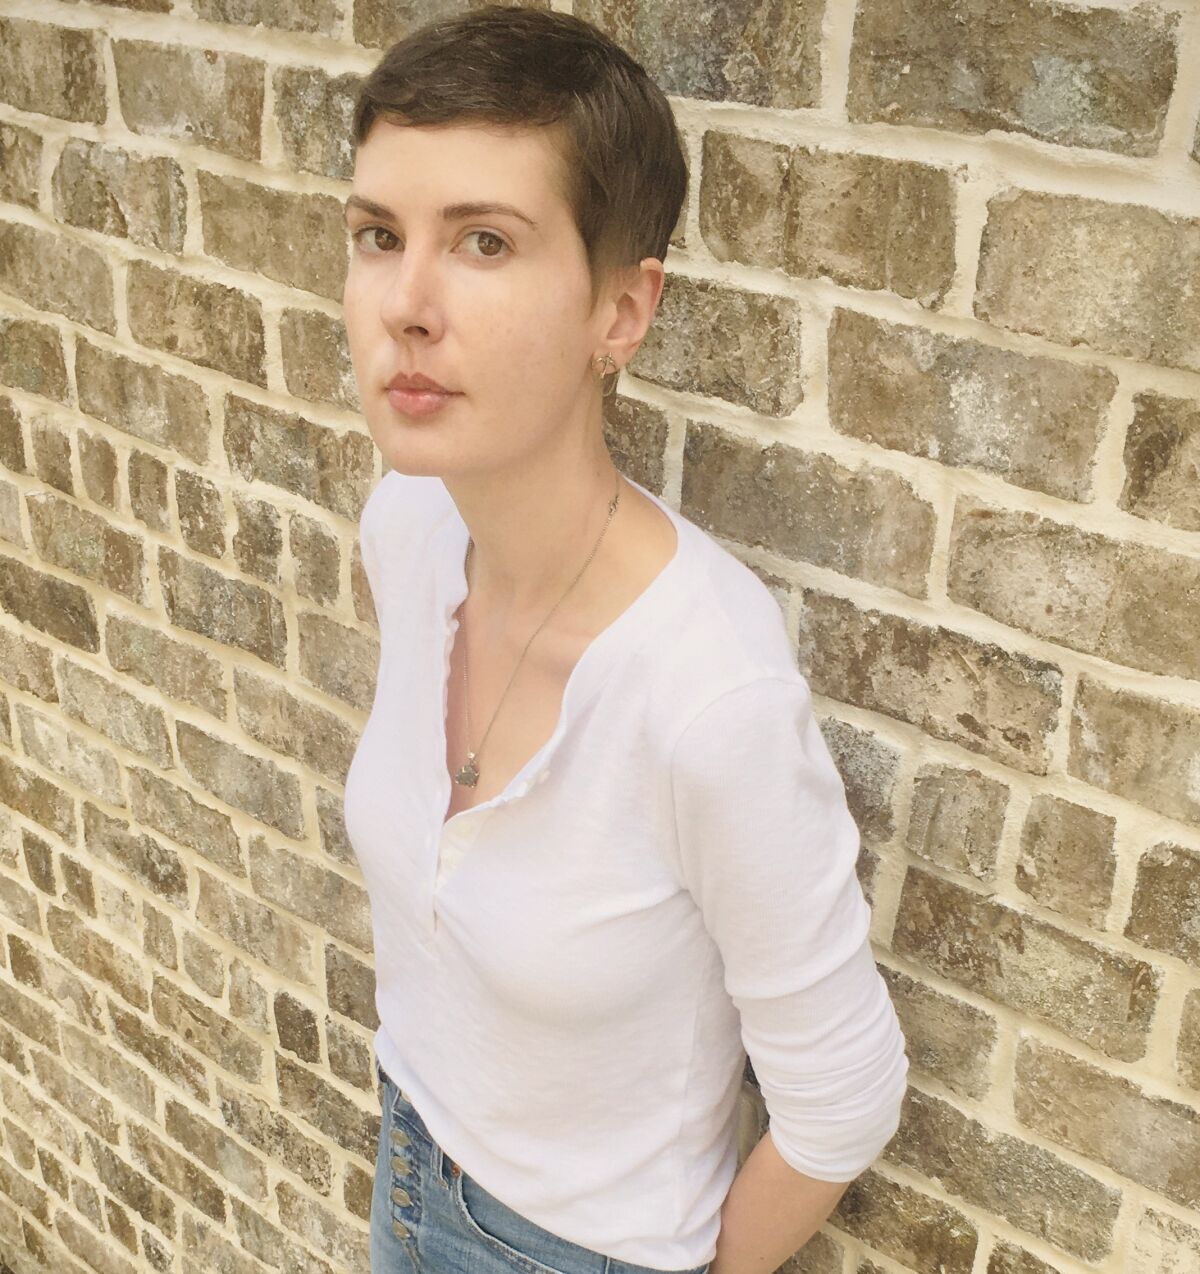 Author Patricia Lockwood stands against a brick wall.